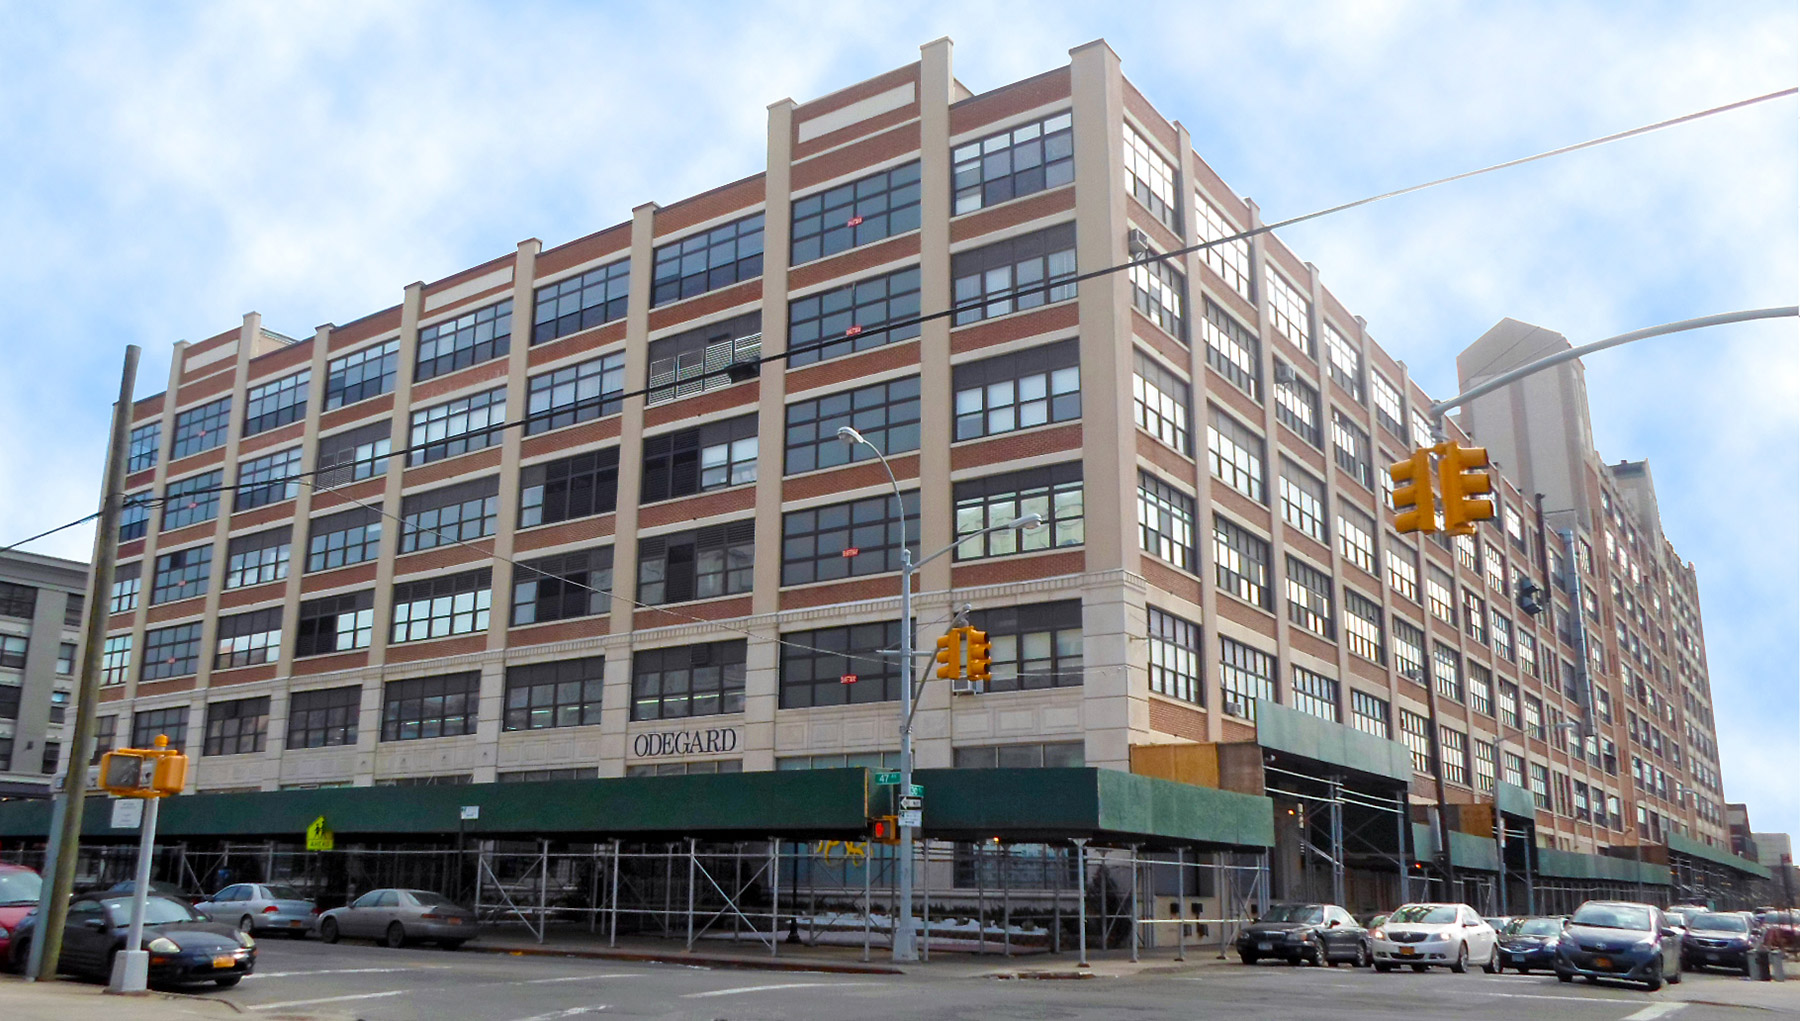 The Factory Building at 30-30 47th Avenue in Long Island City